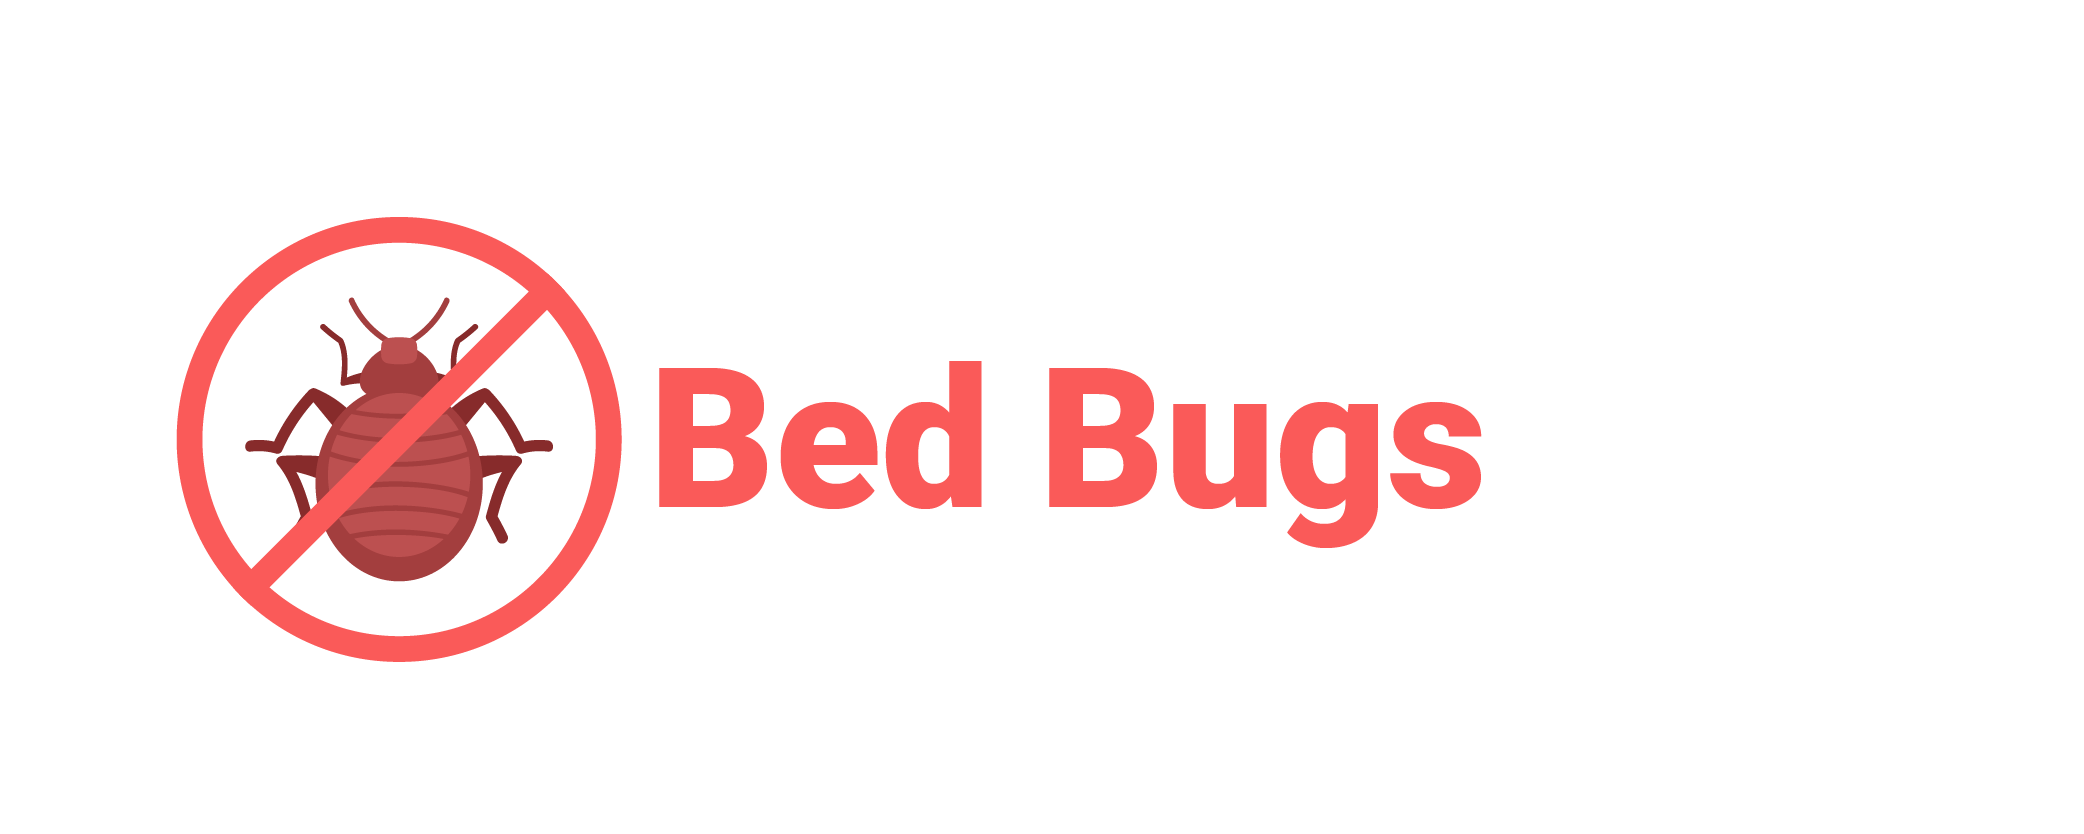 How To Get Rid of Bed Bugs 